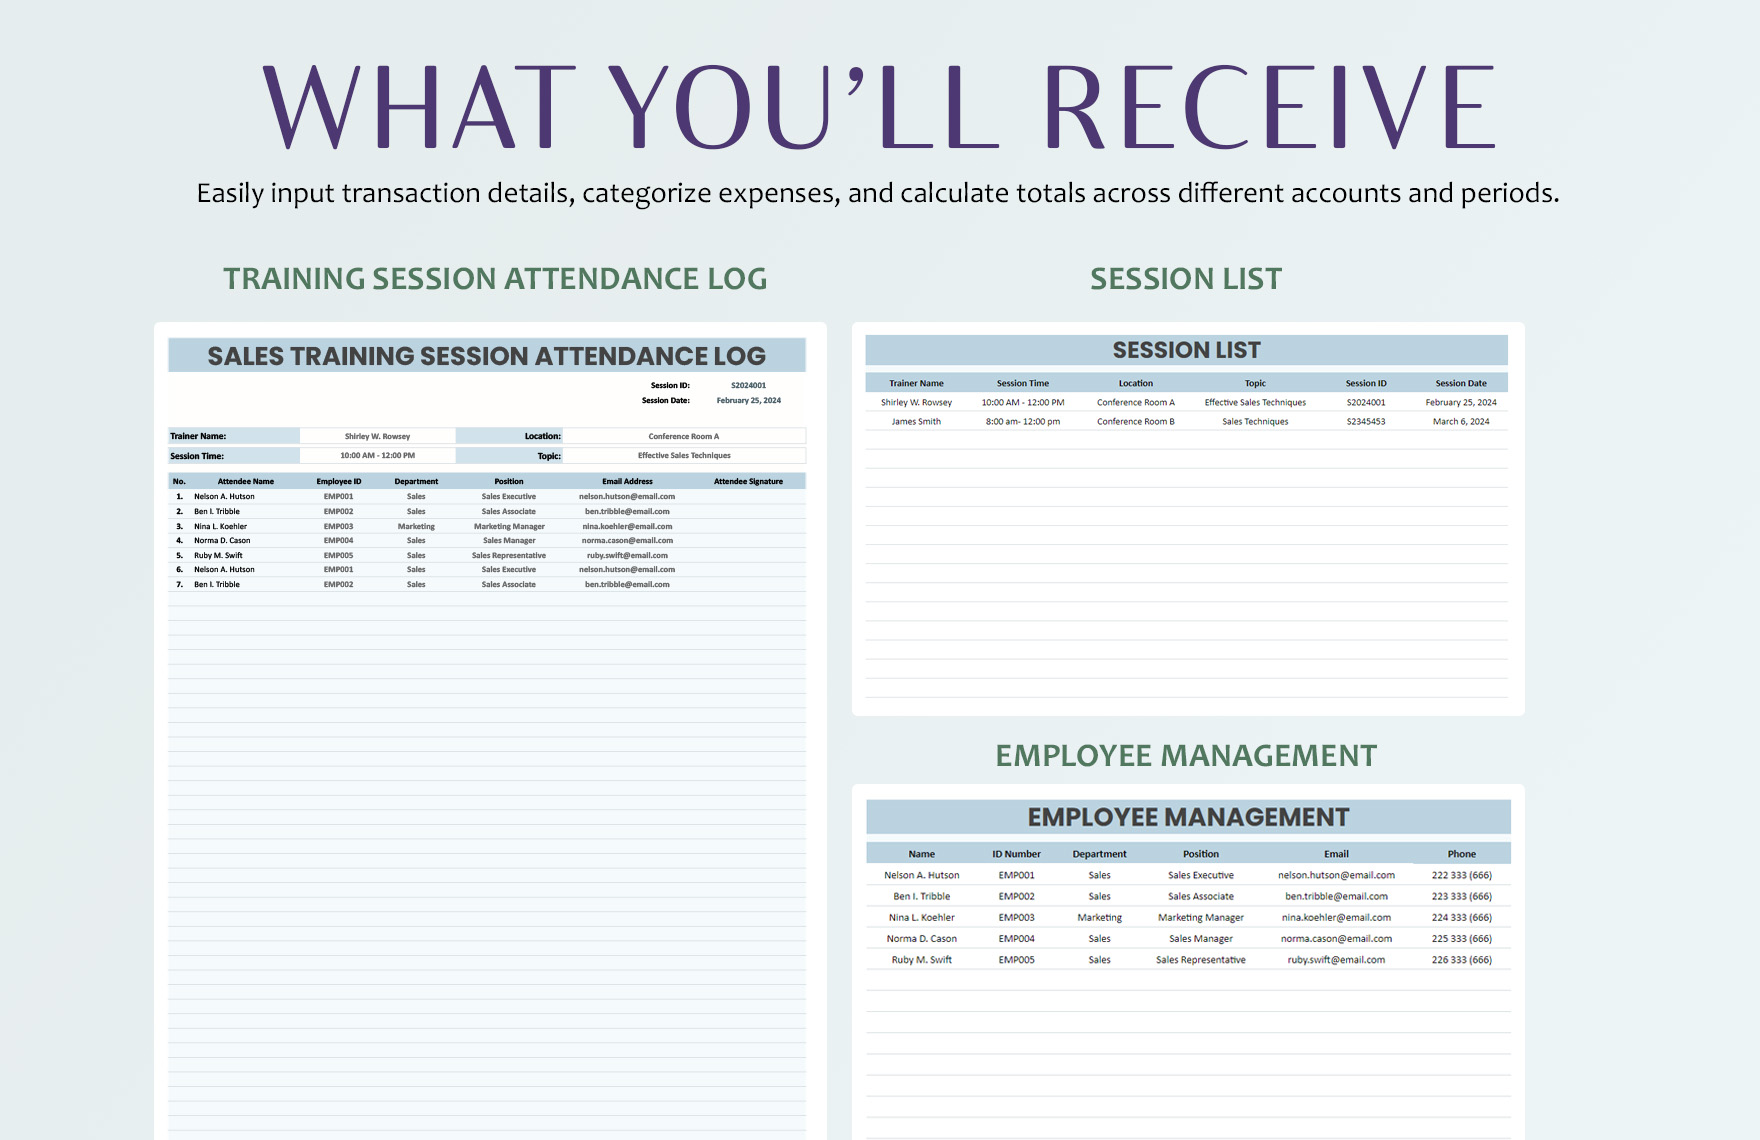 Sales Training Session Attendance Log Template